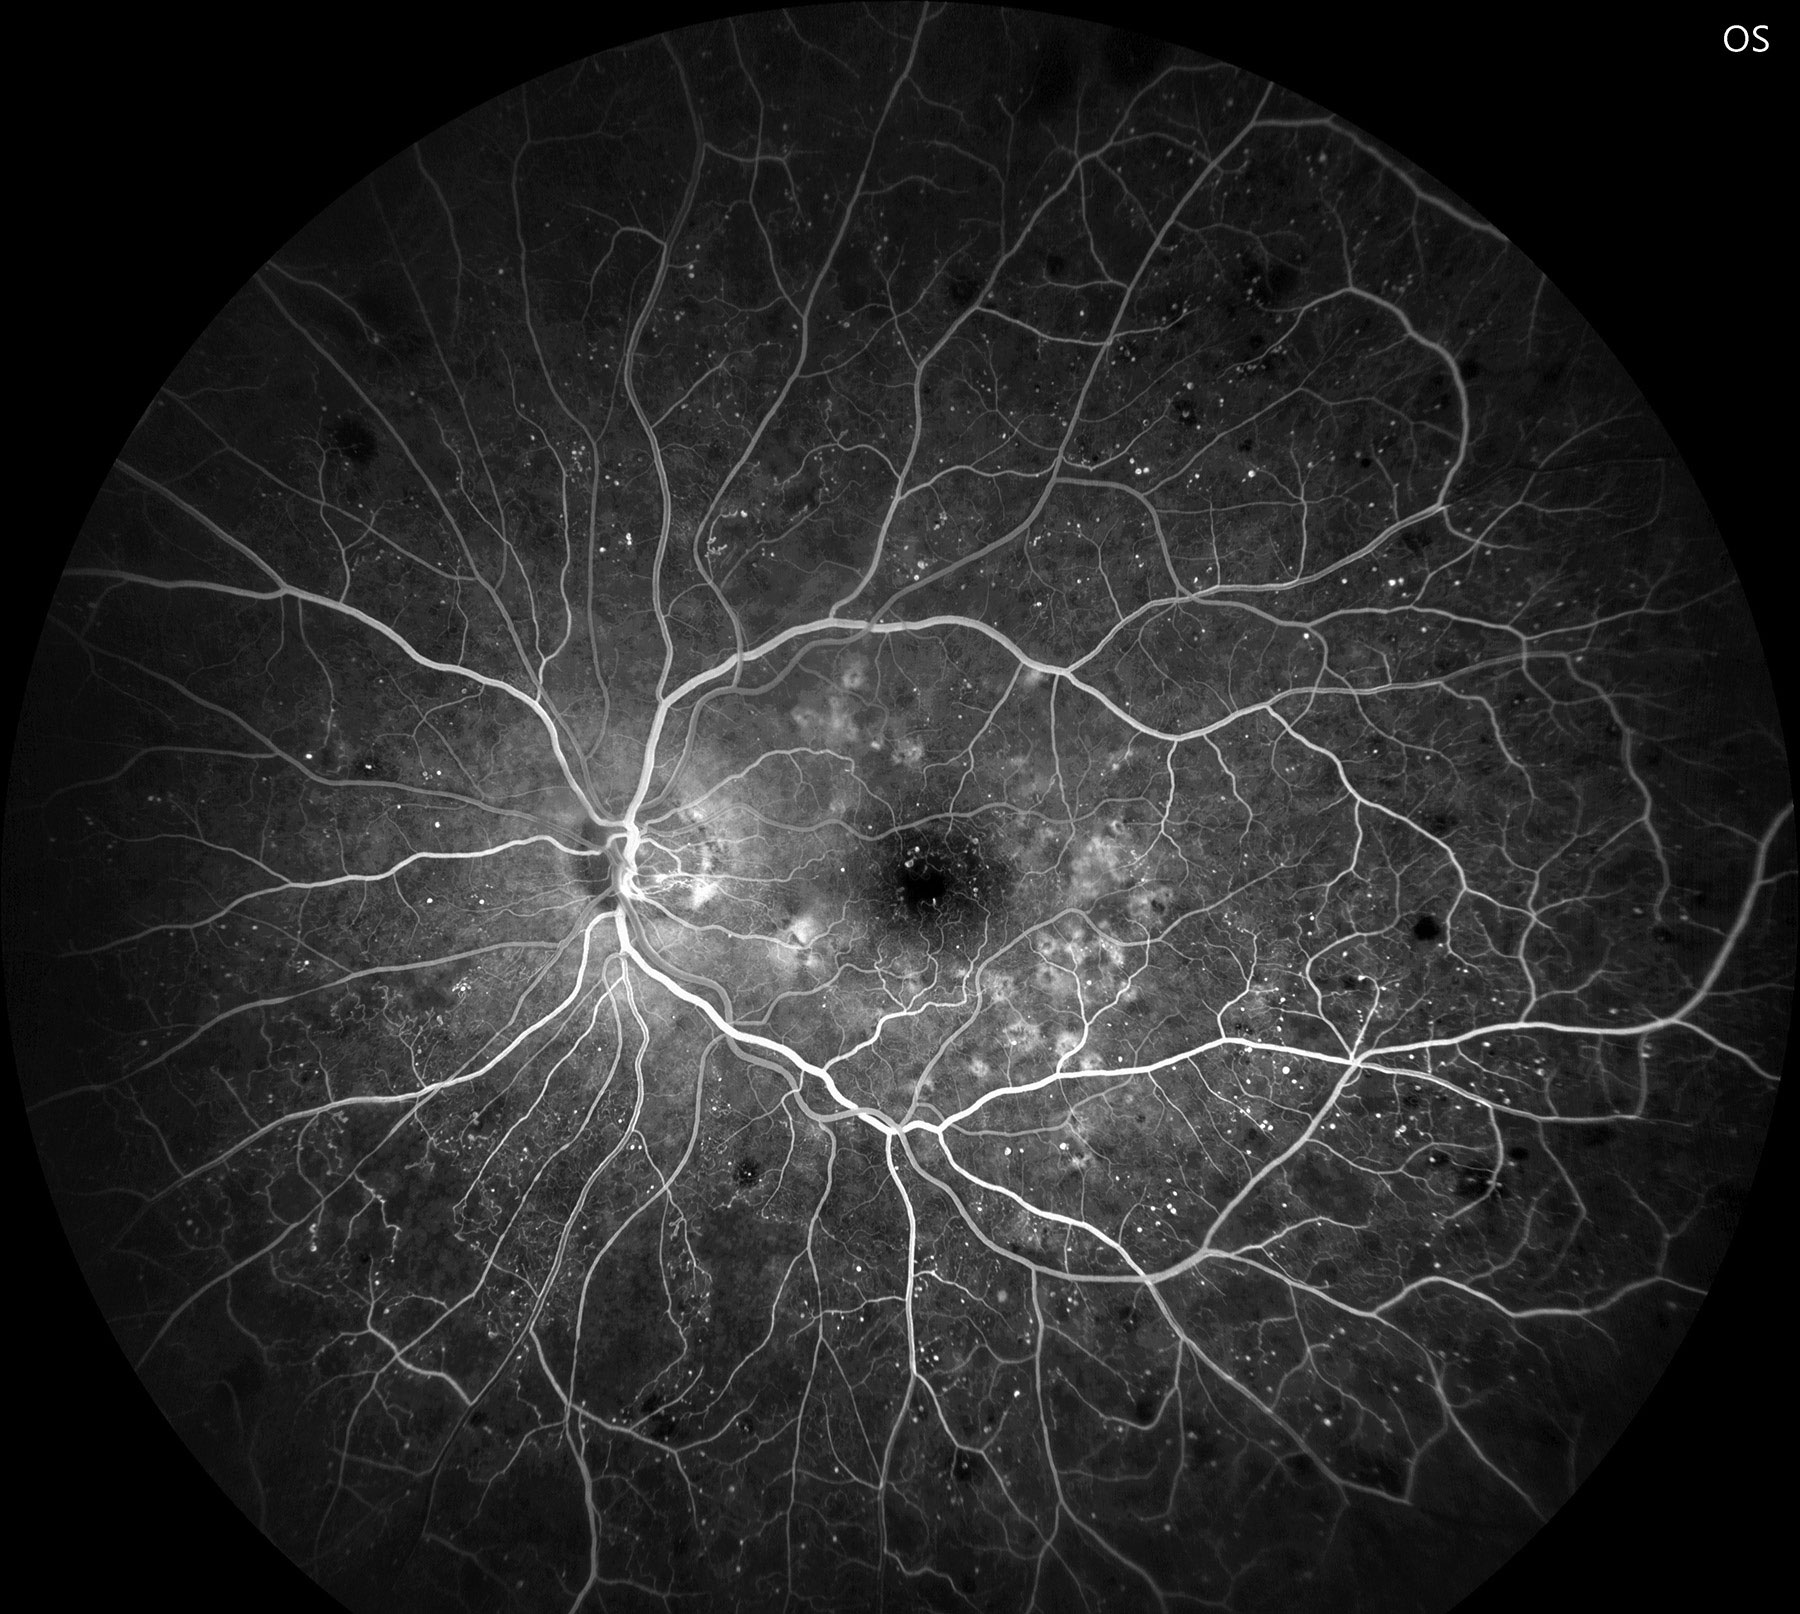 Fluorescein angiography confirms early PDR with significant non-perfusion and neovascularization of the disc.